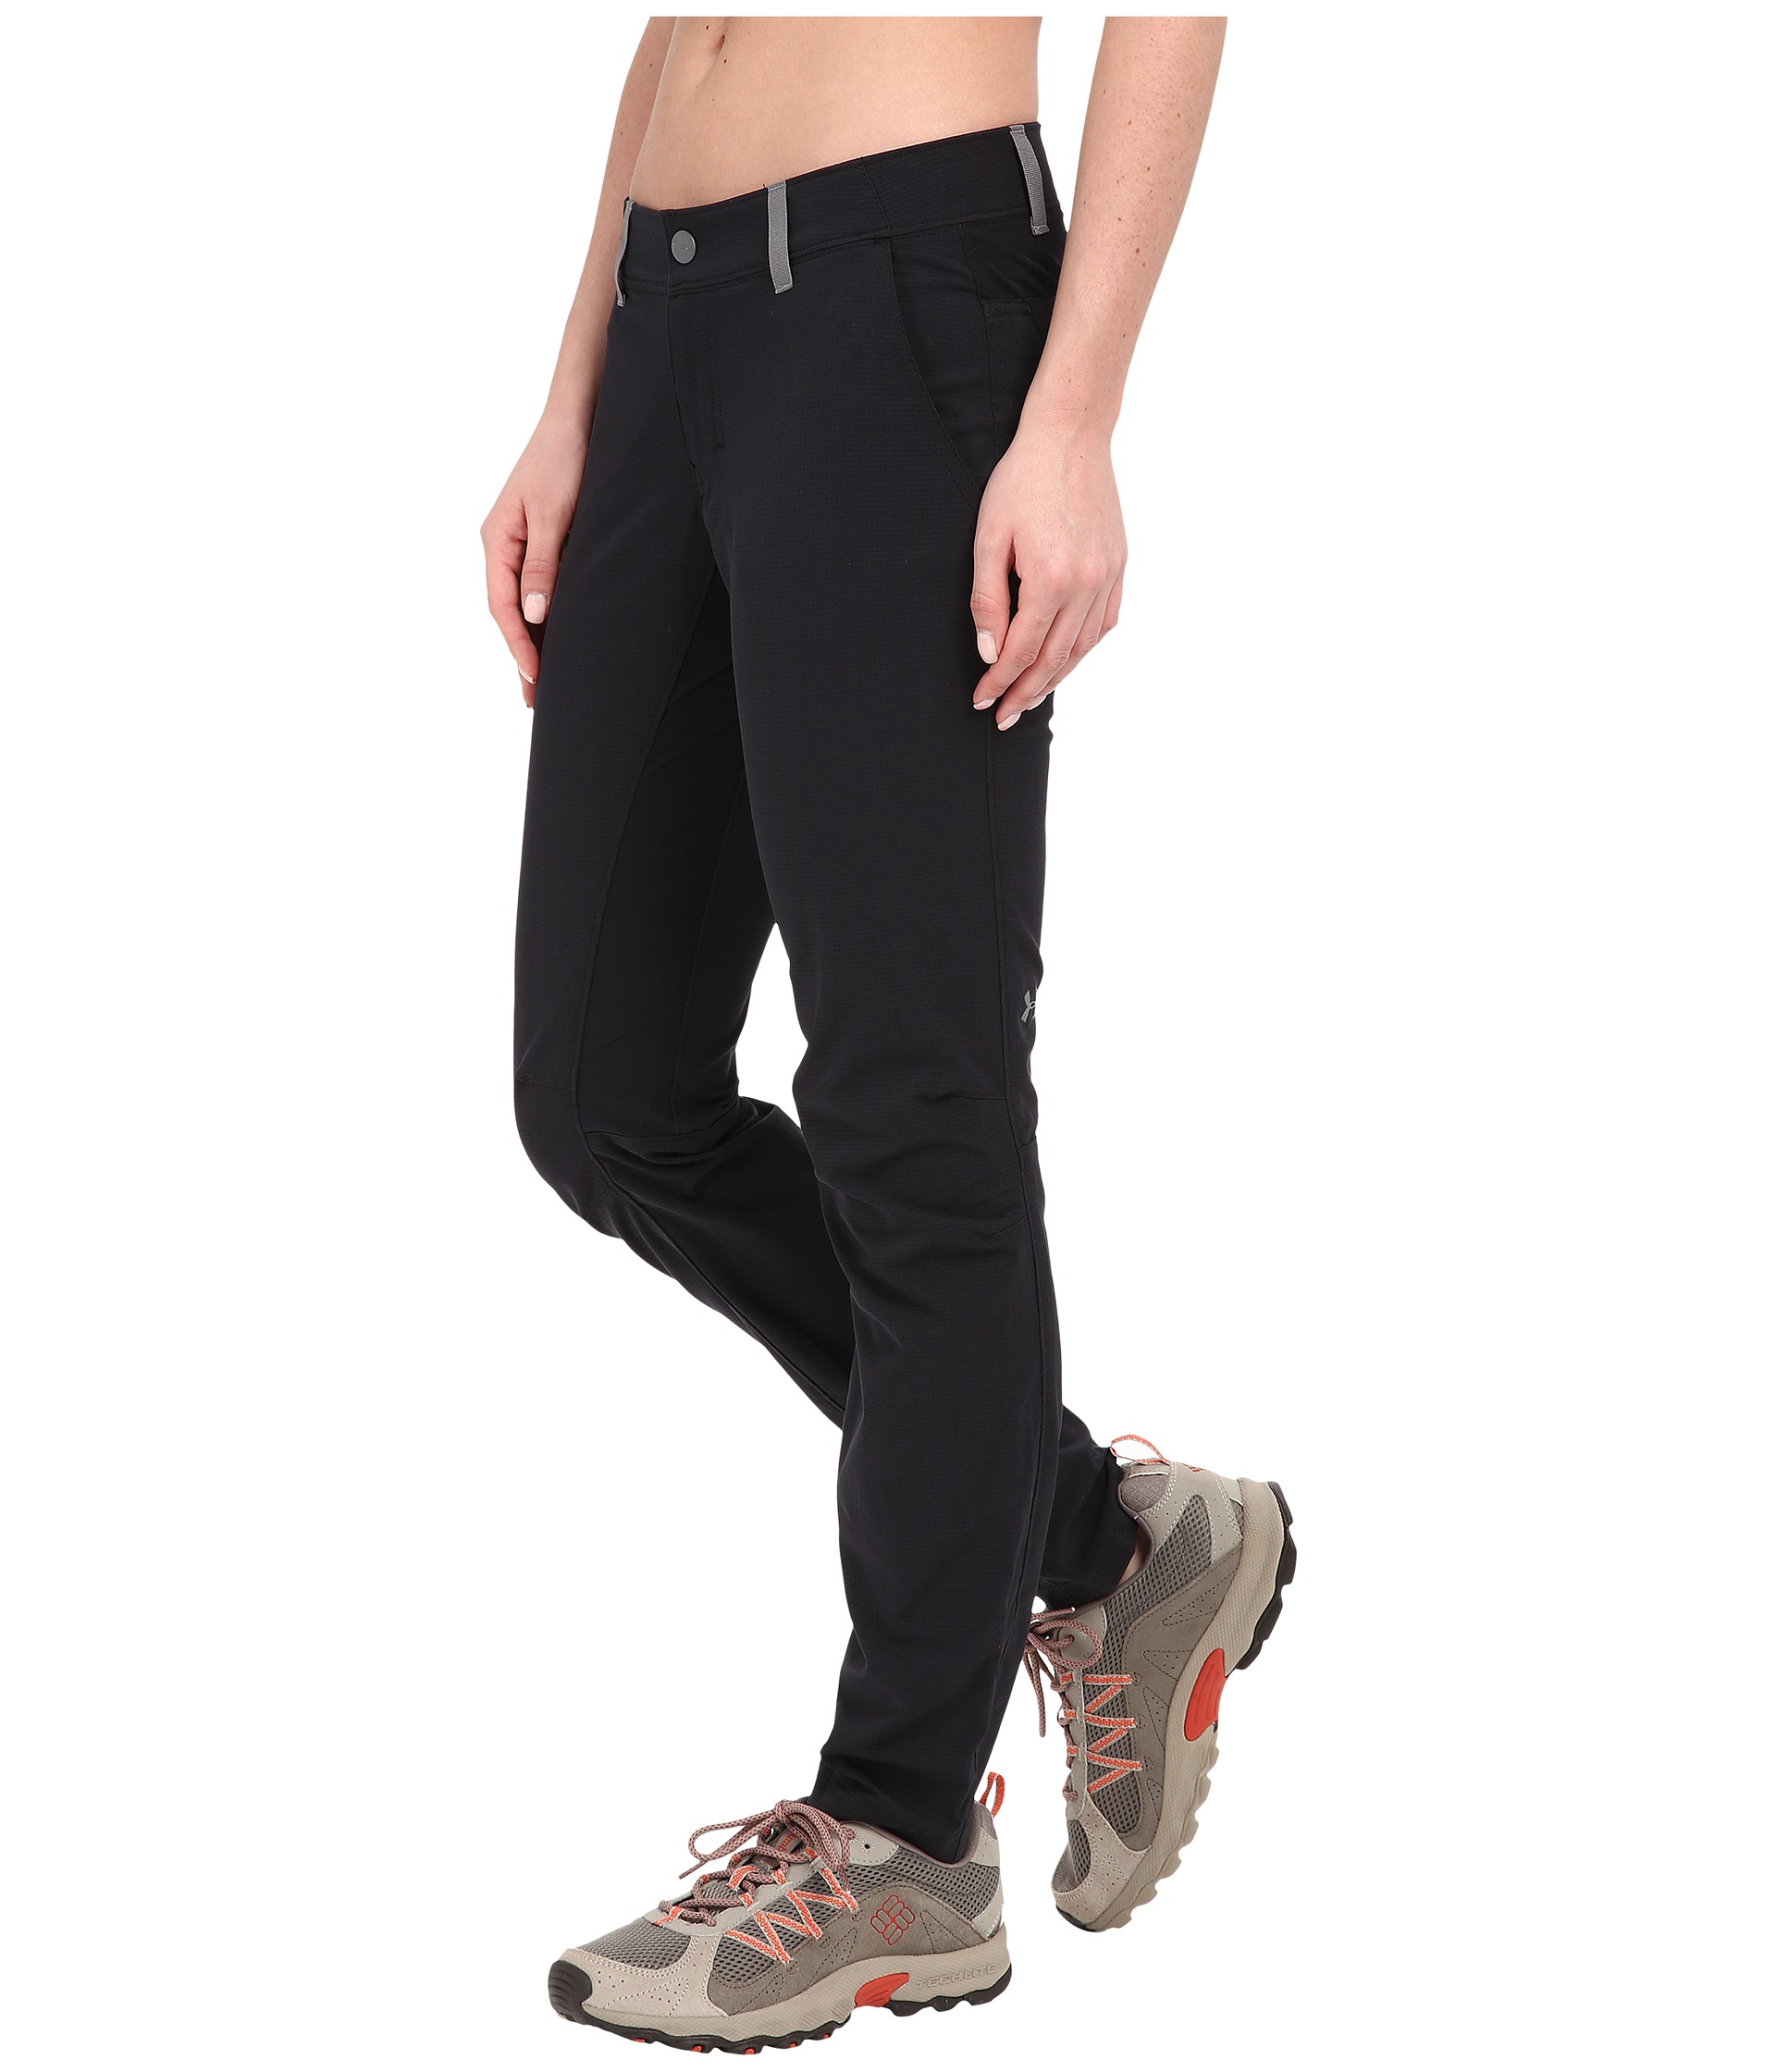 Ua Armourvent Trail Pants in Black 